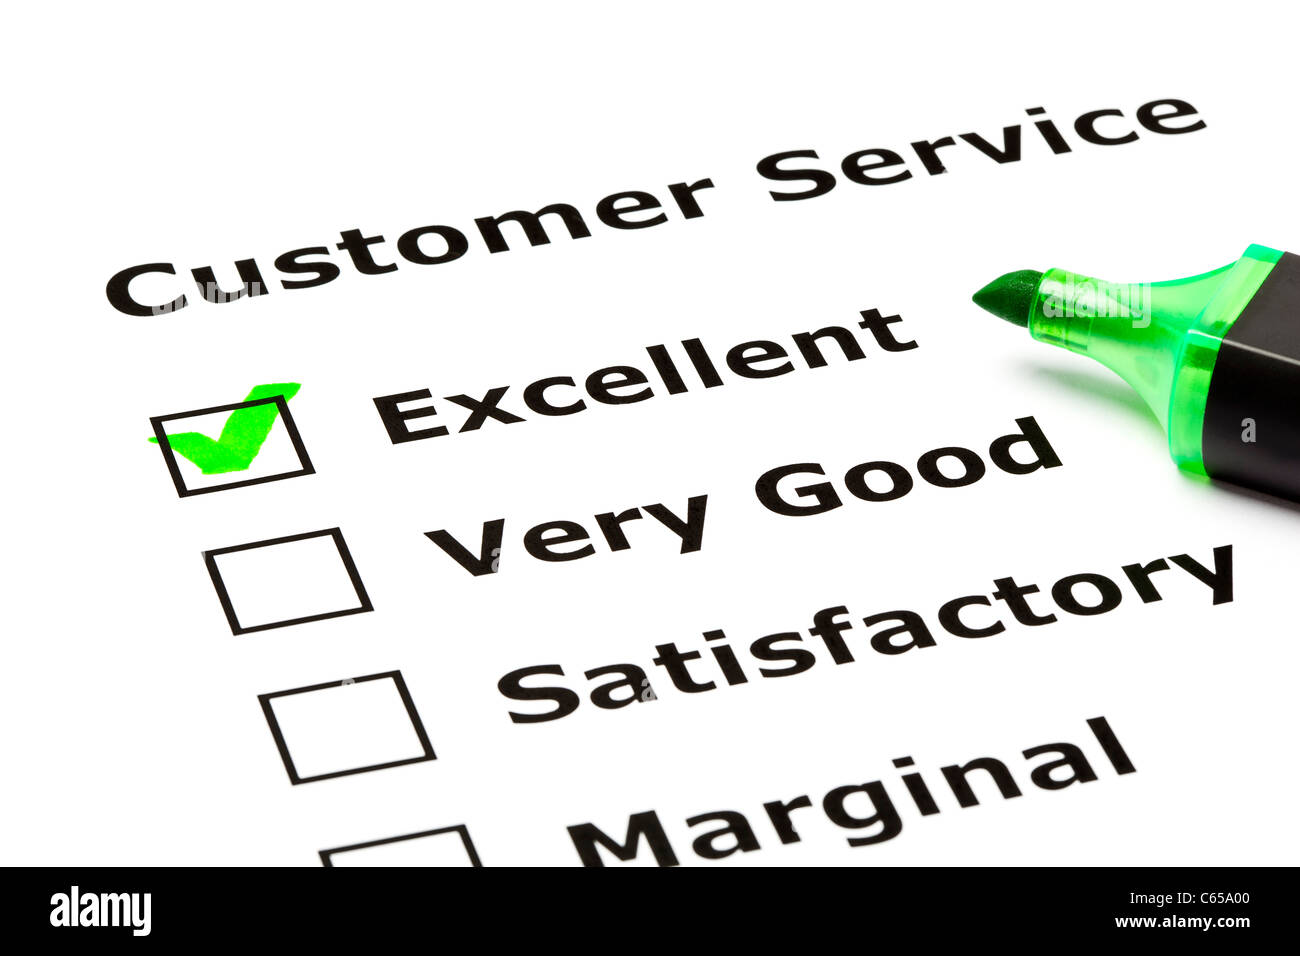 Customer service evaluation form with green tick on Excellent with felt tip pen. Stock Photo